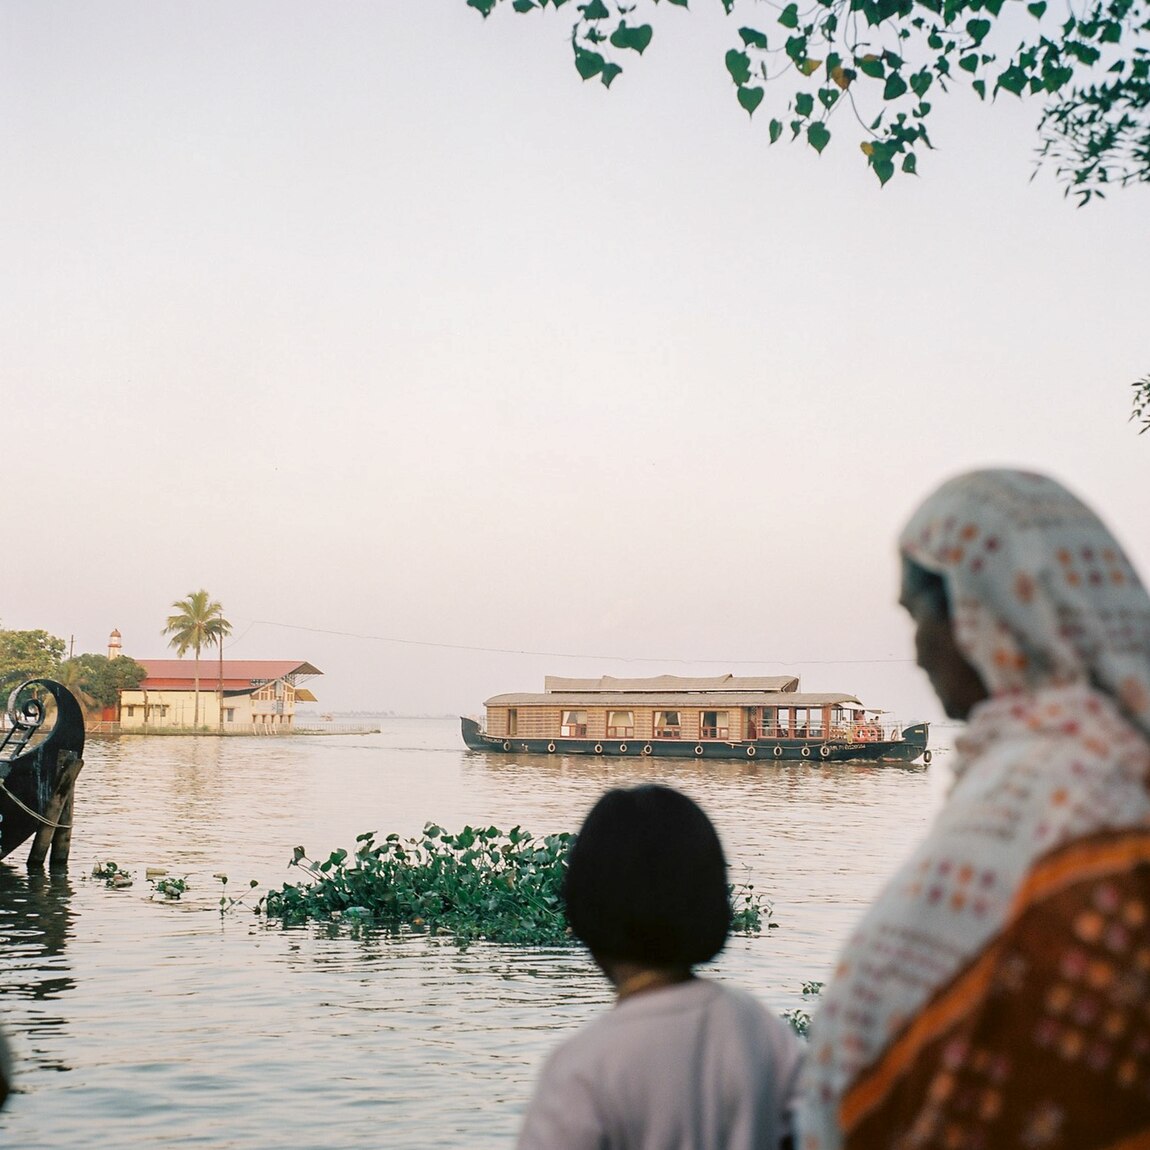 Visitors take in the view of Lake Vembanad from the city of Alleppey in India’s Kerala state. The lake is a popular vacation spot for Indians and visitors from other countries.